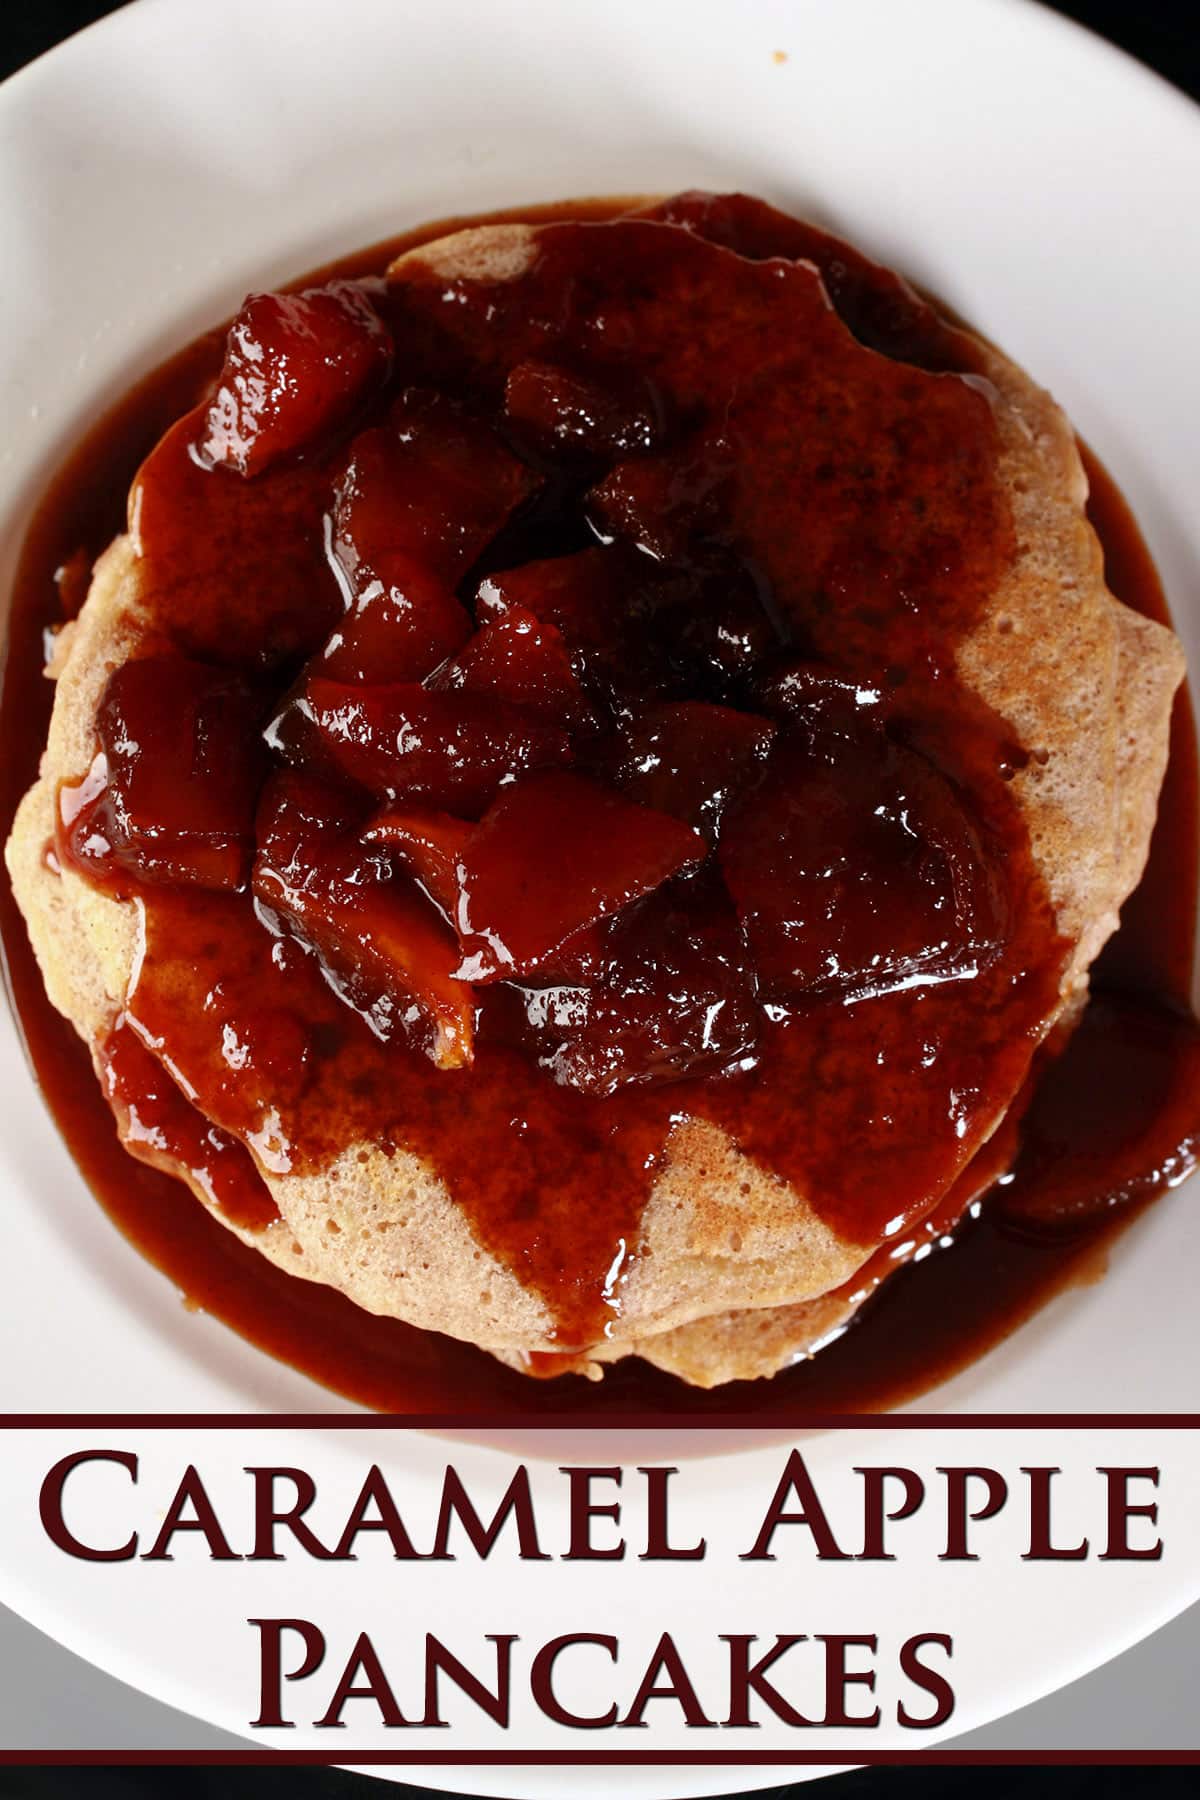 A stack of apple pancakes topped with caramel apple sauce.